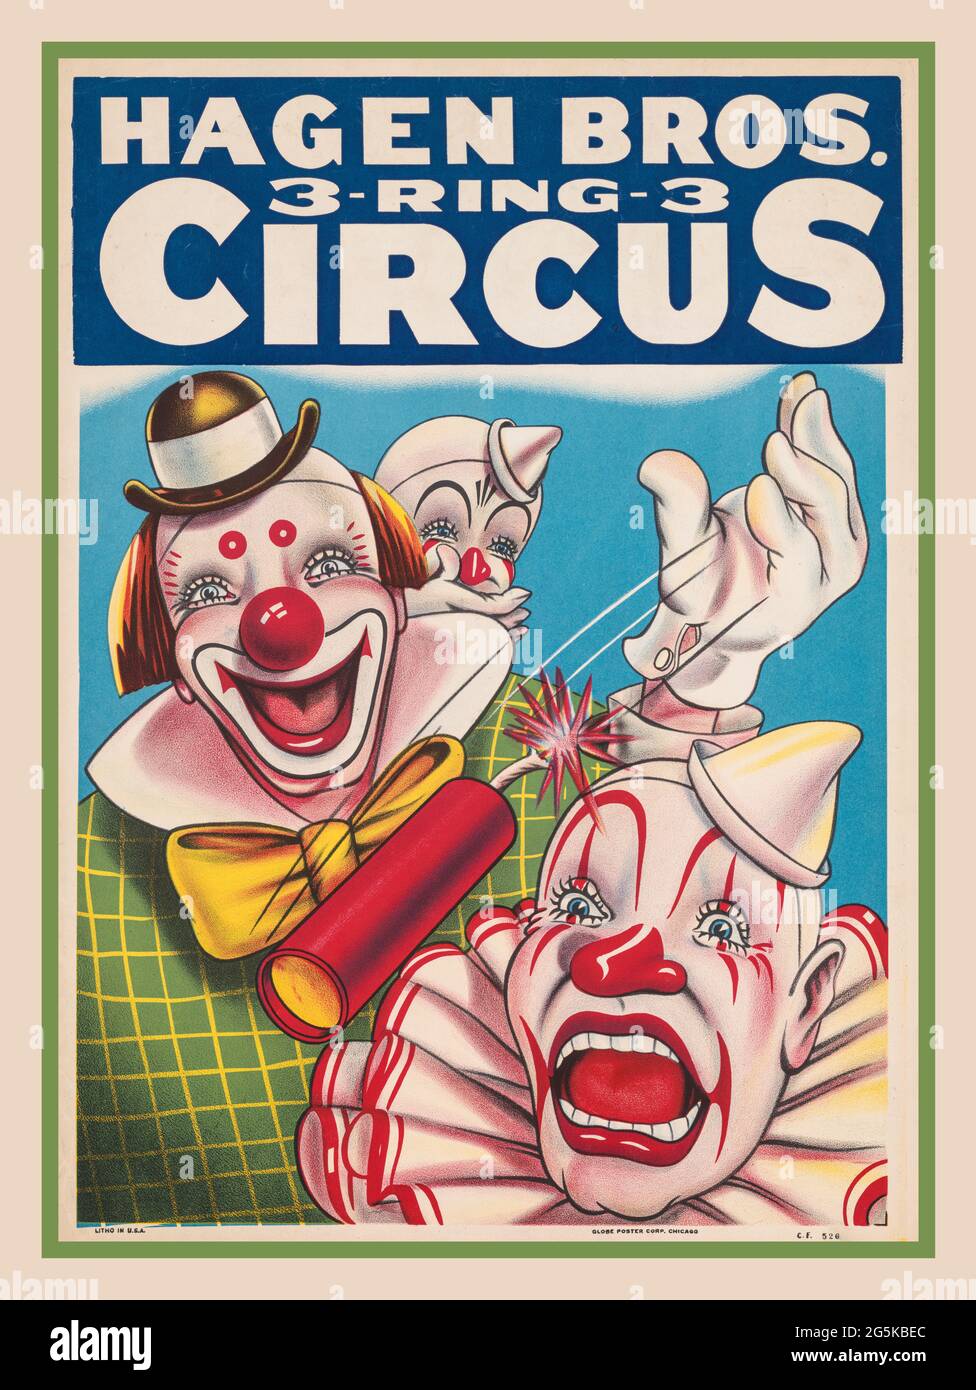 CIRCUS POSTER 1900s Hagen Bros. 3-ring-3 circus lithograph poster Circus poster showing clown faces and fire cracker. Chicago : Globe Poster Corp., [between 1900 and 1910] Chromolithographs--1900-1910. Circus posters--American--1900-1910. Stock Photo